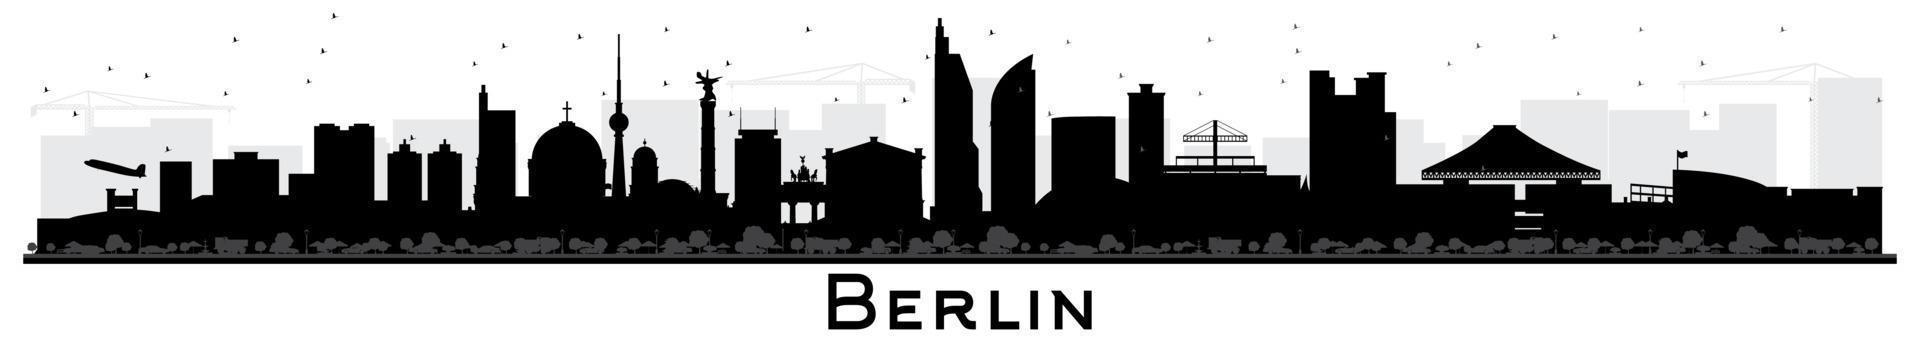 Berlin Germany City Skyline Silhouette with Black Buildings Isolated on White. vector